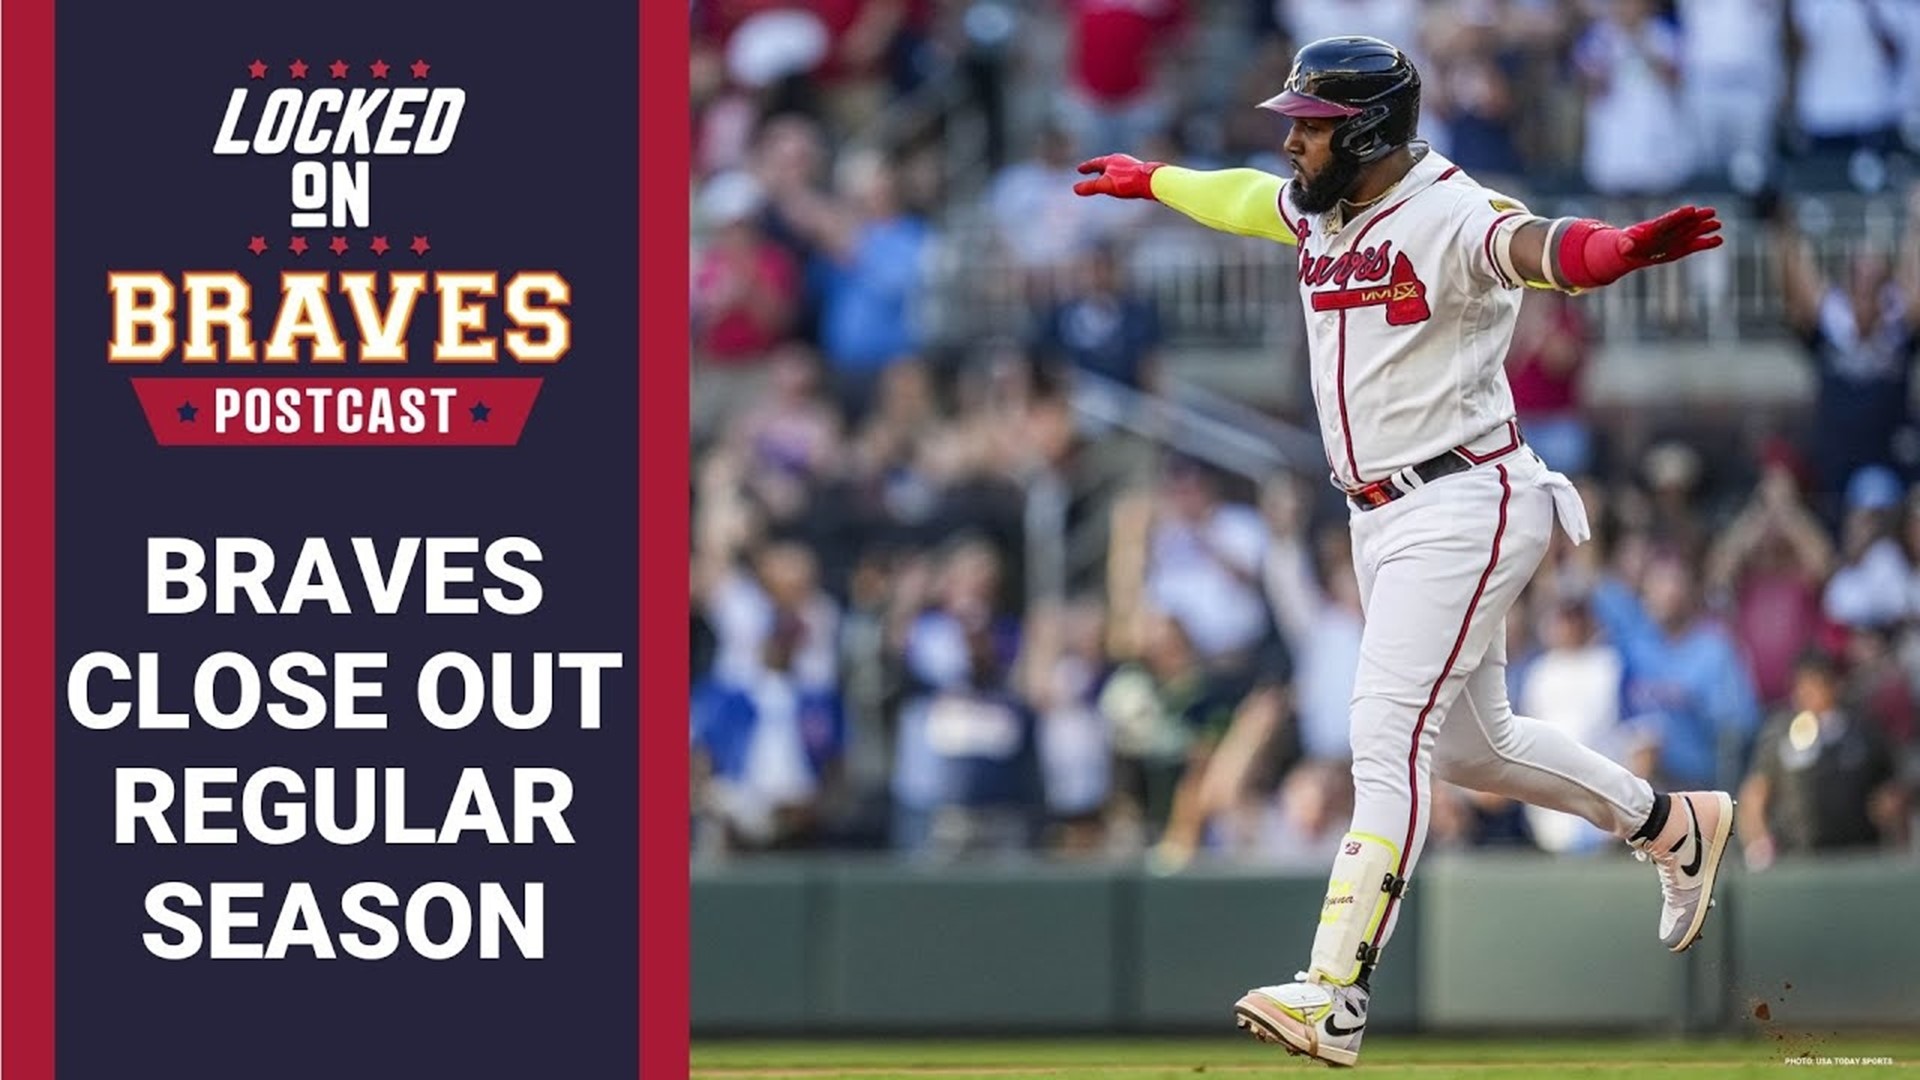 The Atlanta Braves made a little more history as they ended their incredible regular season with a 10-9 loss at the hands of the Washington Nationals.